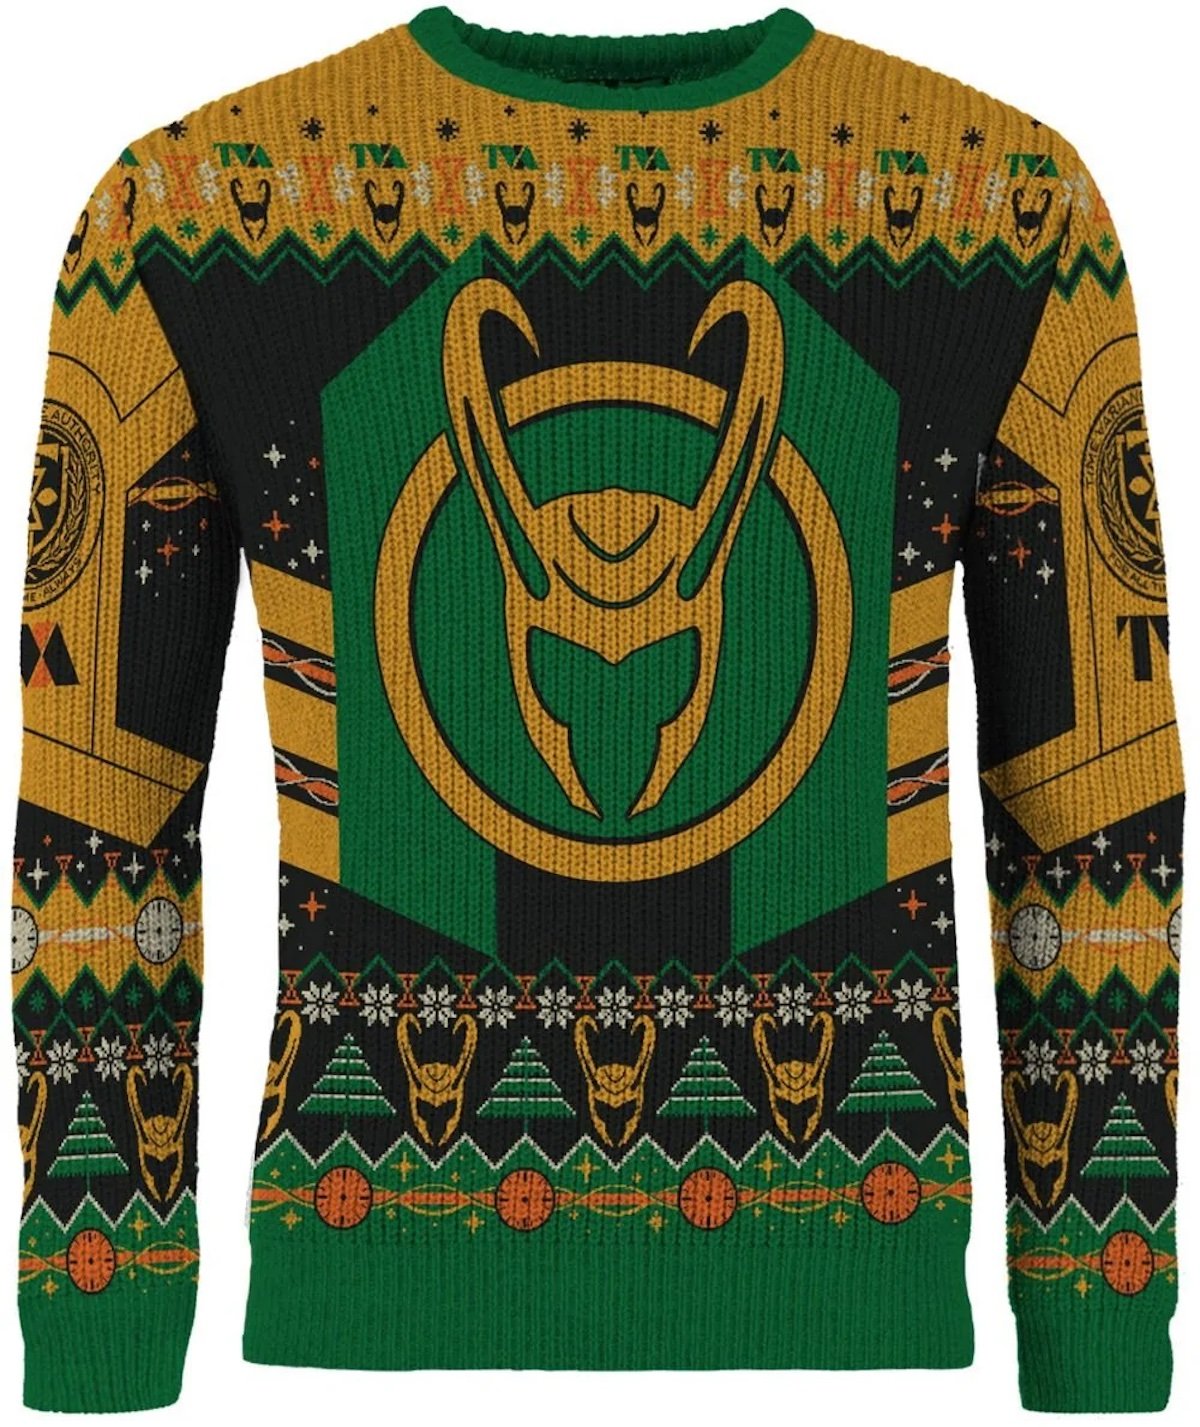 A green, black, and gold Loki-themed Christmas sweater